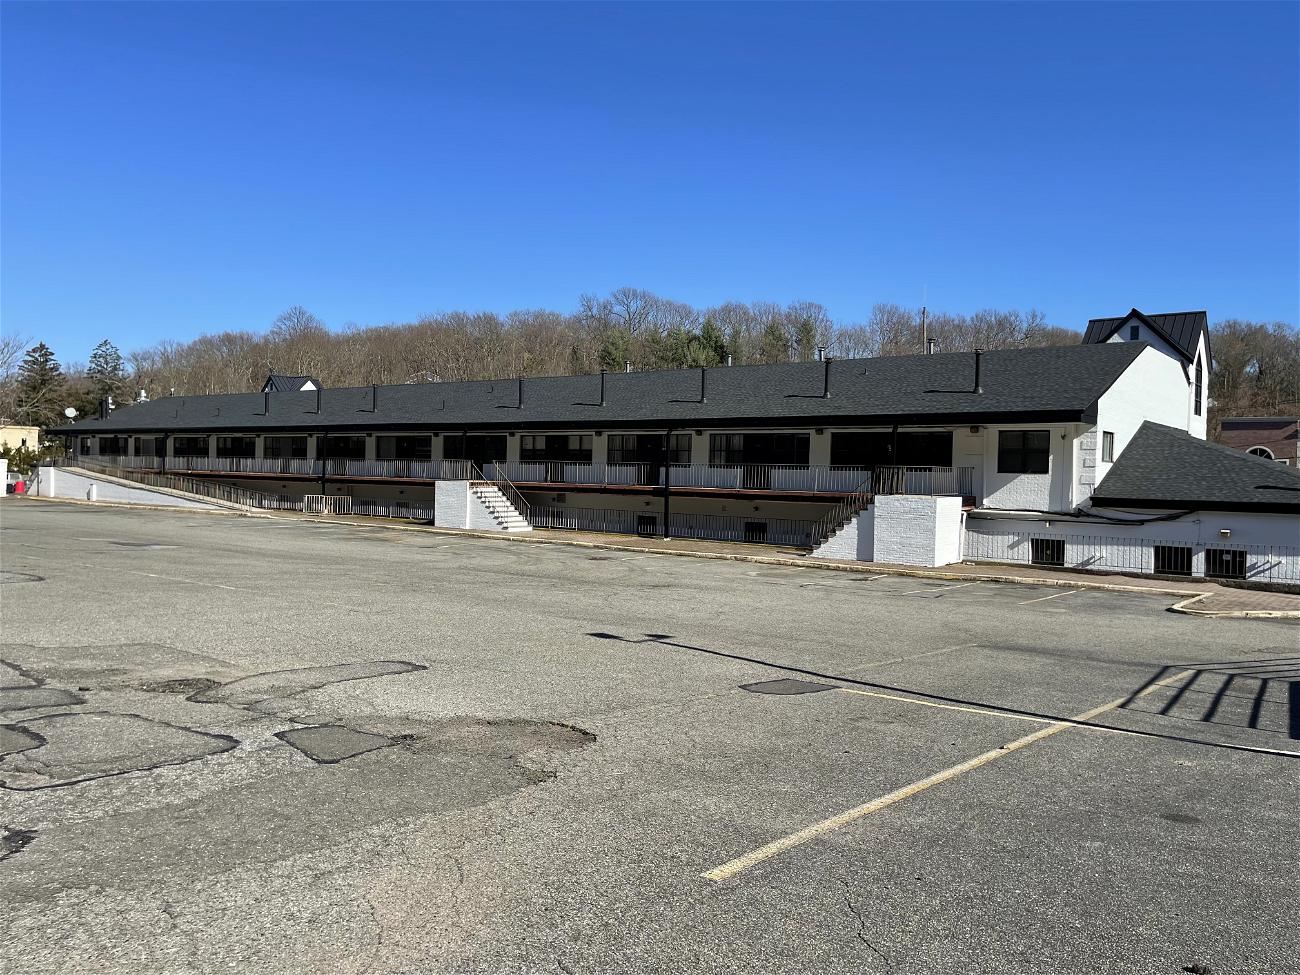 An application for 19 apartments behind commercial businesses at Northfort Town Plaza on Fort Salonga Road has been withdrawn, according to TOH officials. 